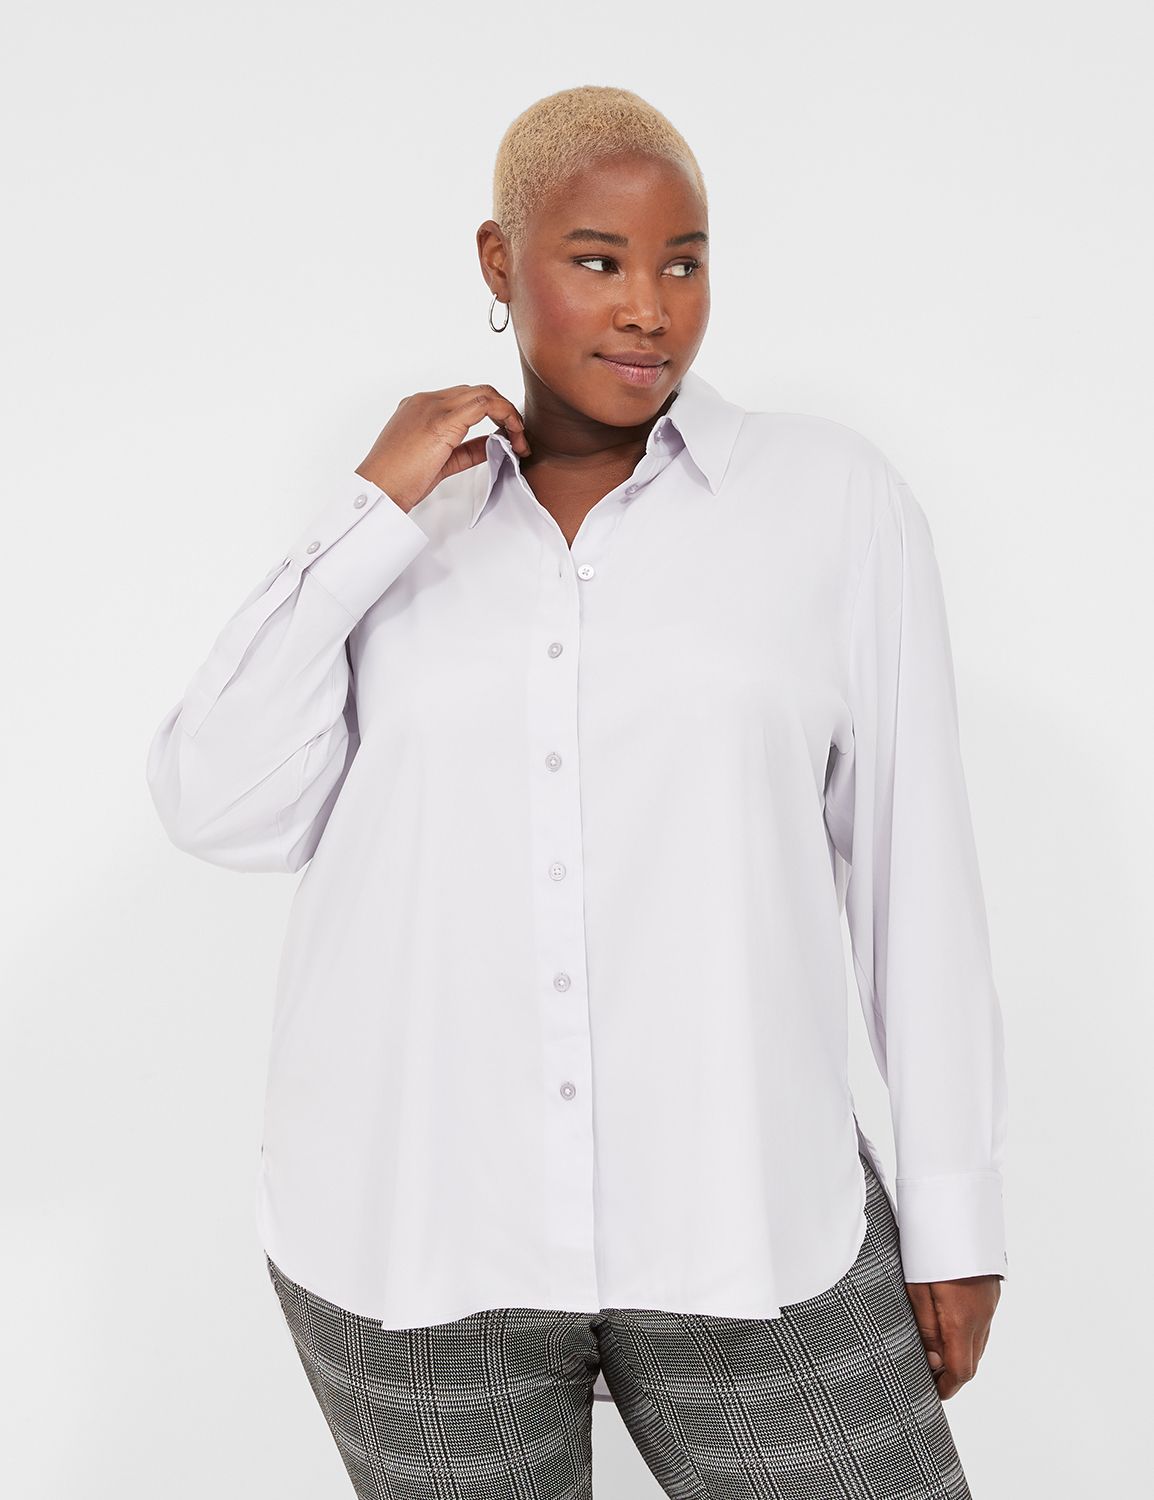 Easy Collared Button-Down Shirt | LaneBryant